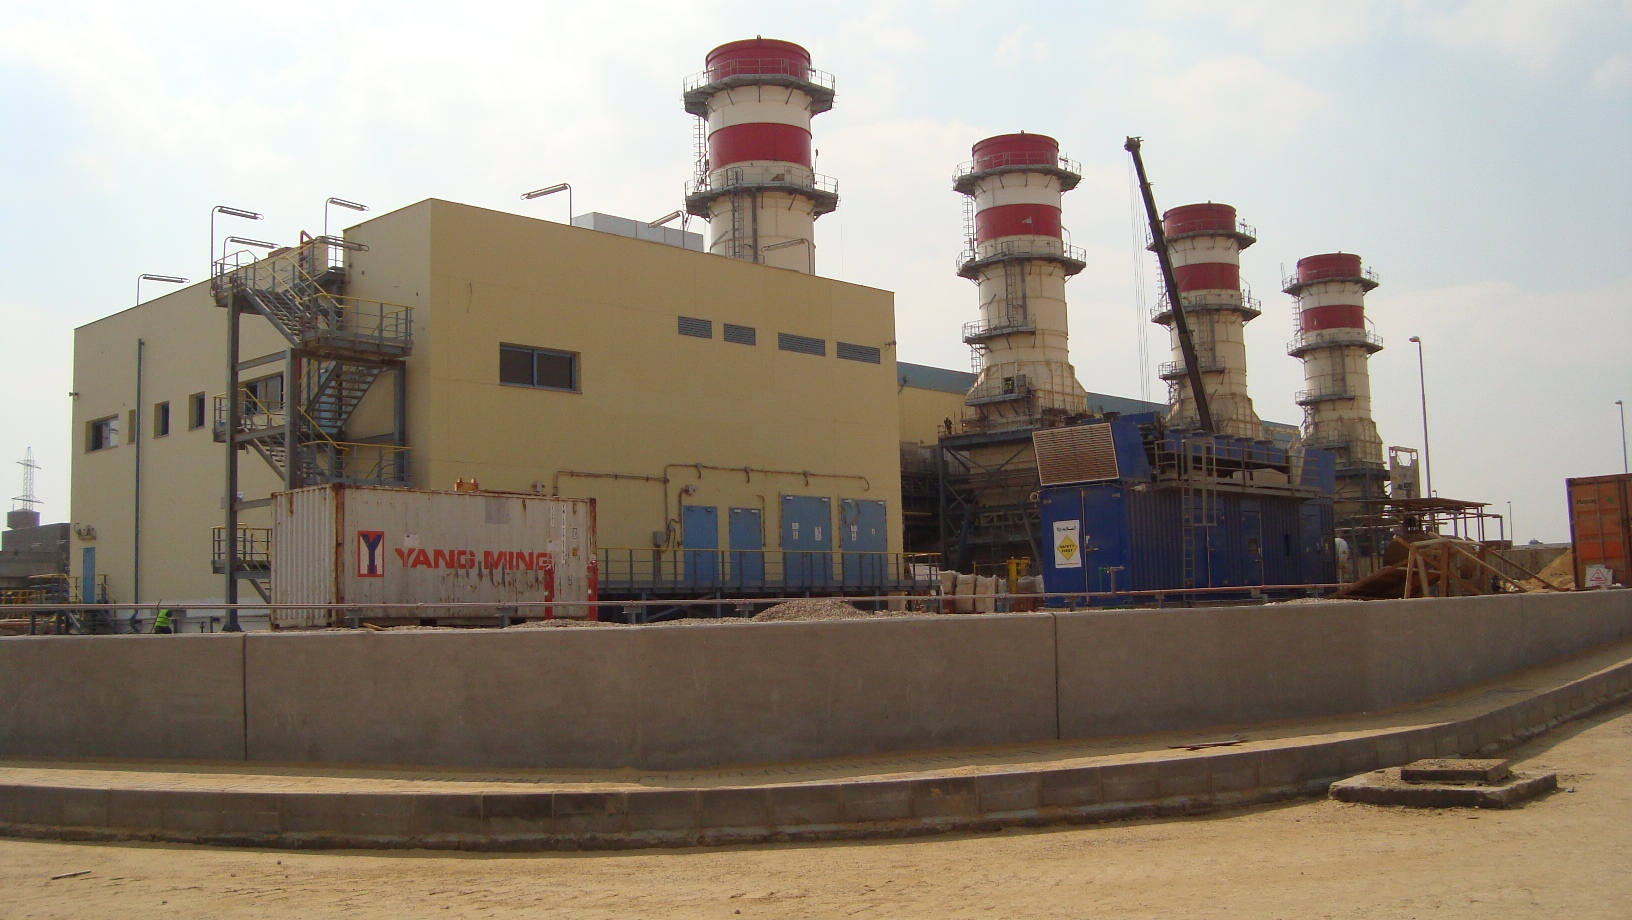 6th of October Power Plant